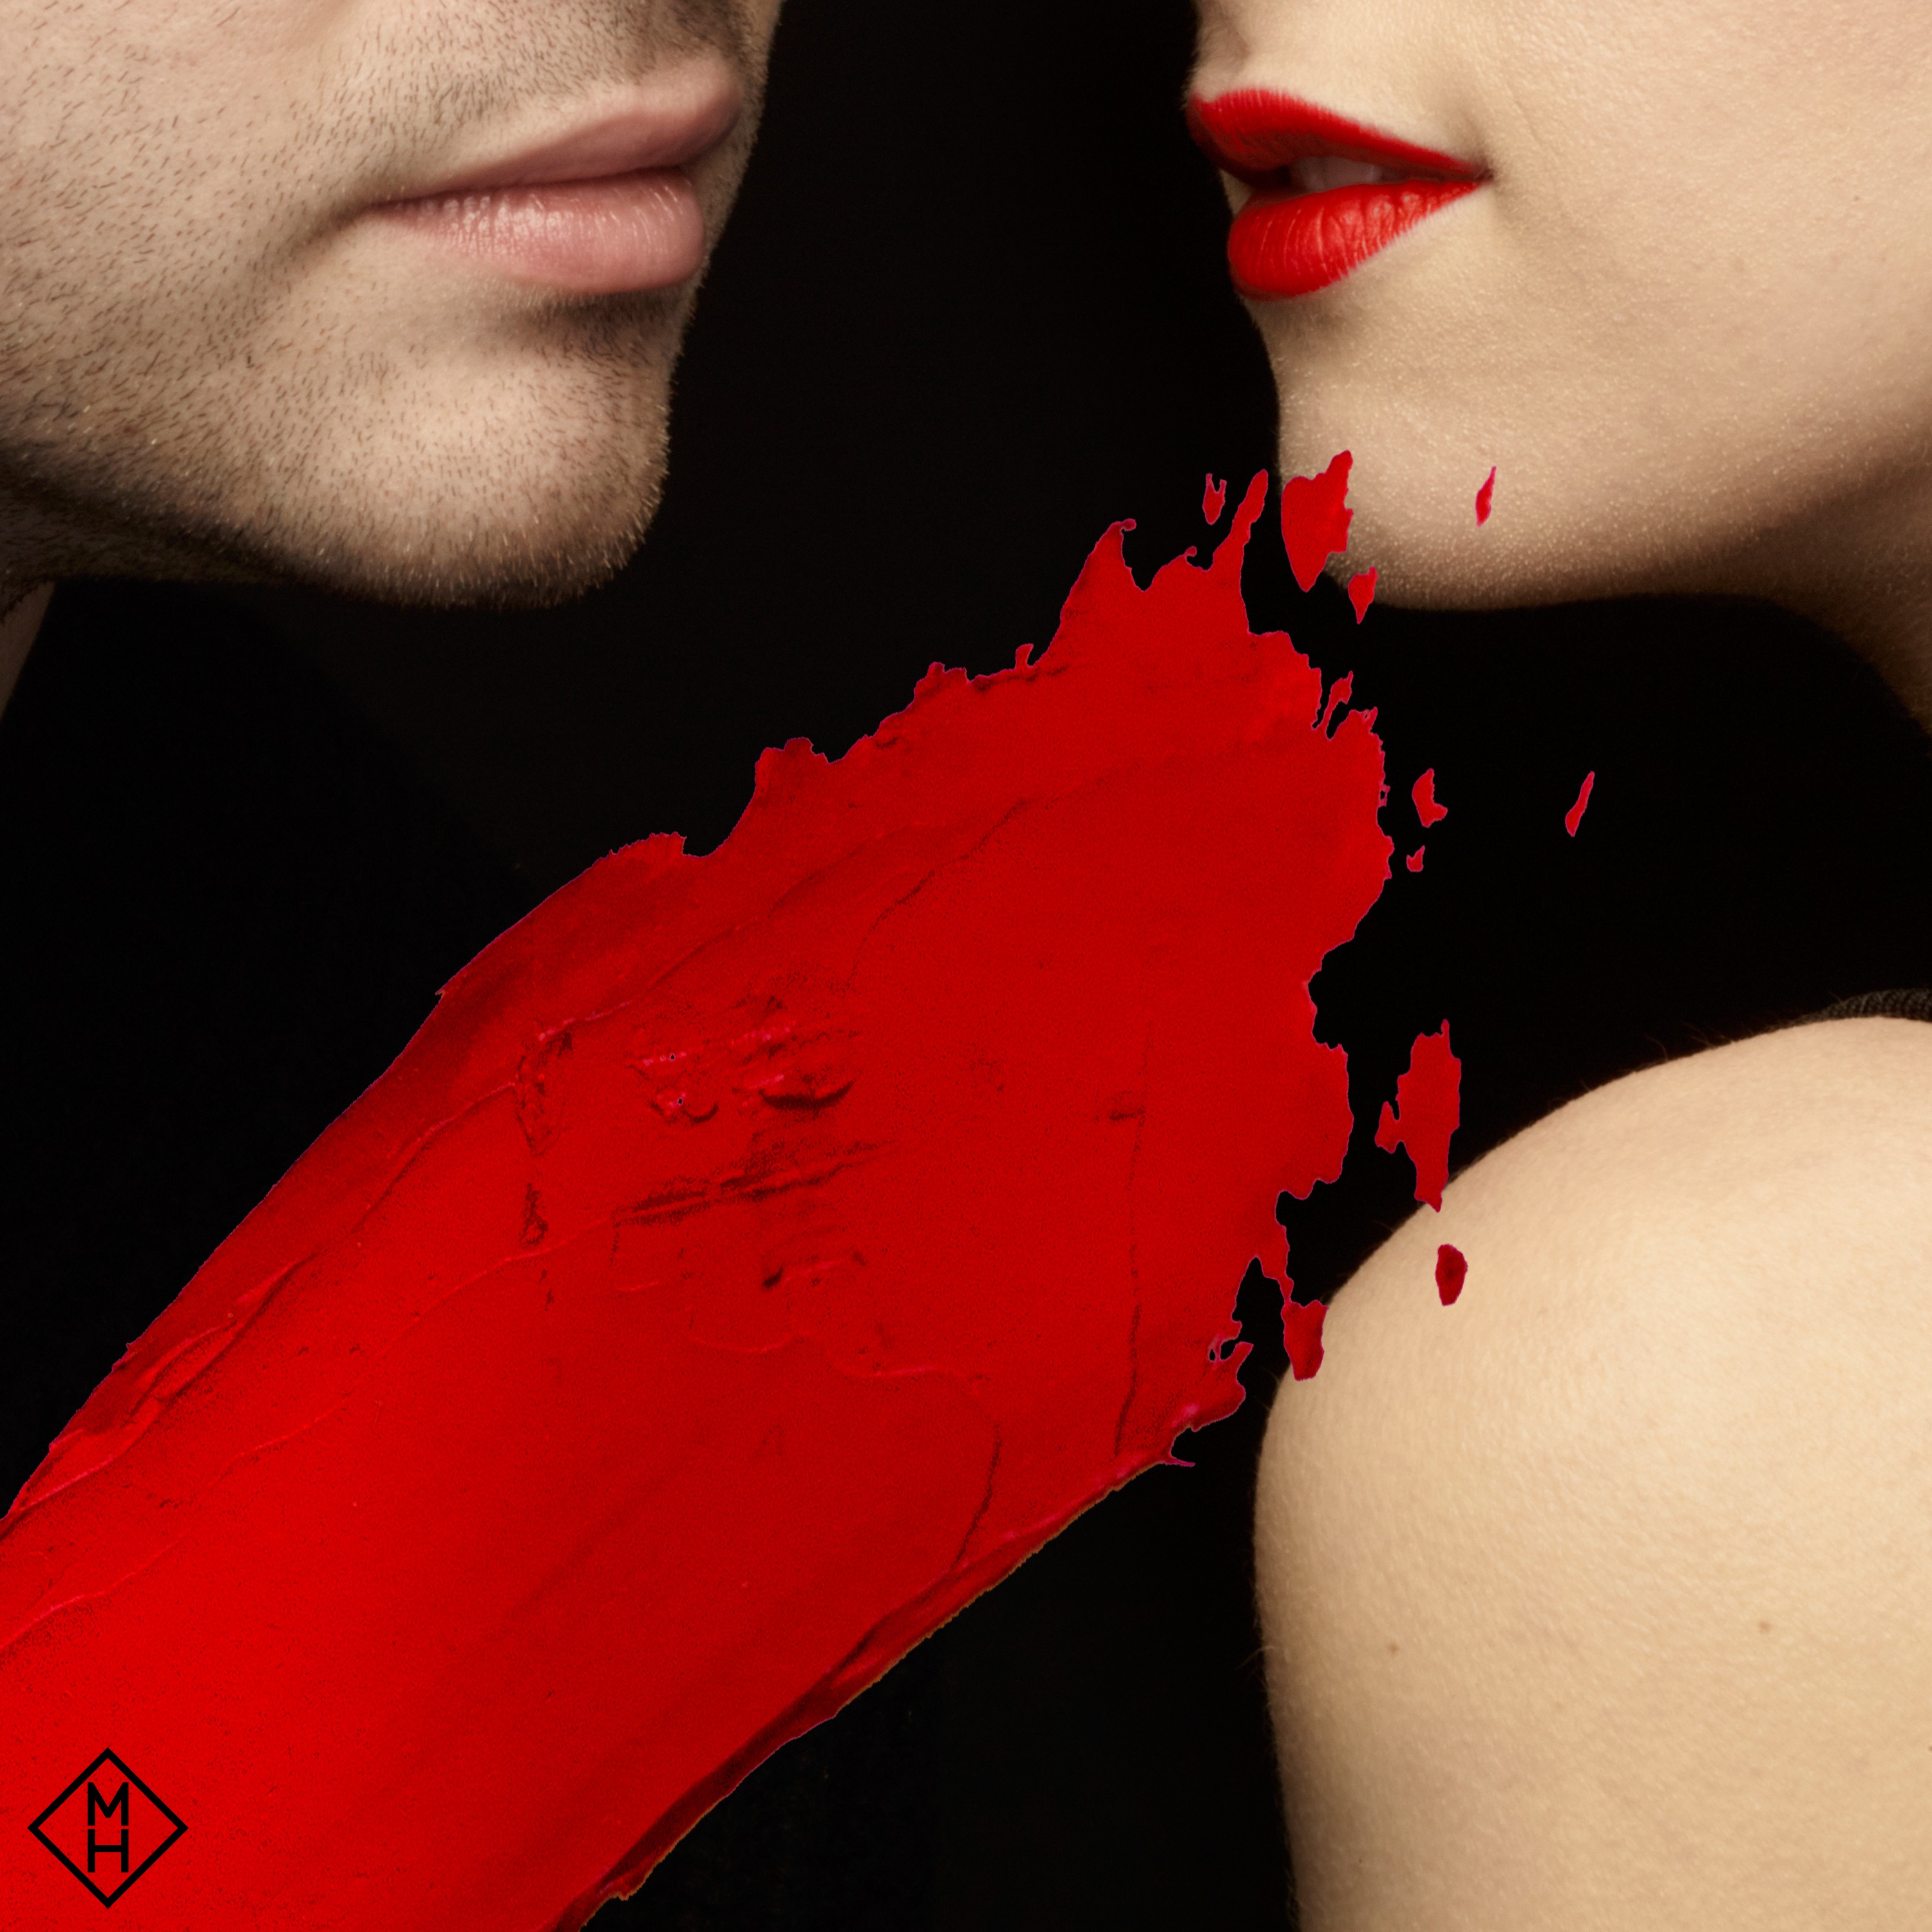 Hear Marian Hill S Brain Rattling Pop Gem I Want You Spin Download torrent safely and anonymously with cheap vpn : hear marian hill s brain rattling pop